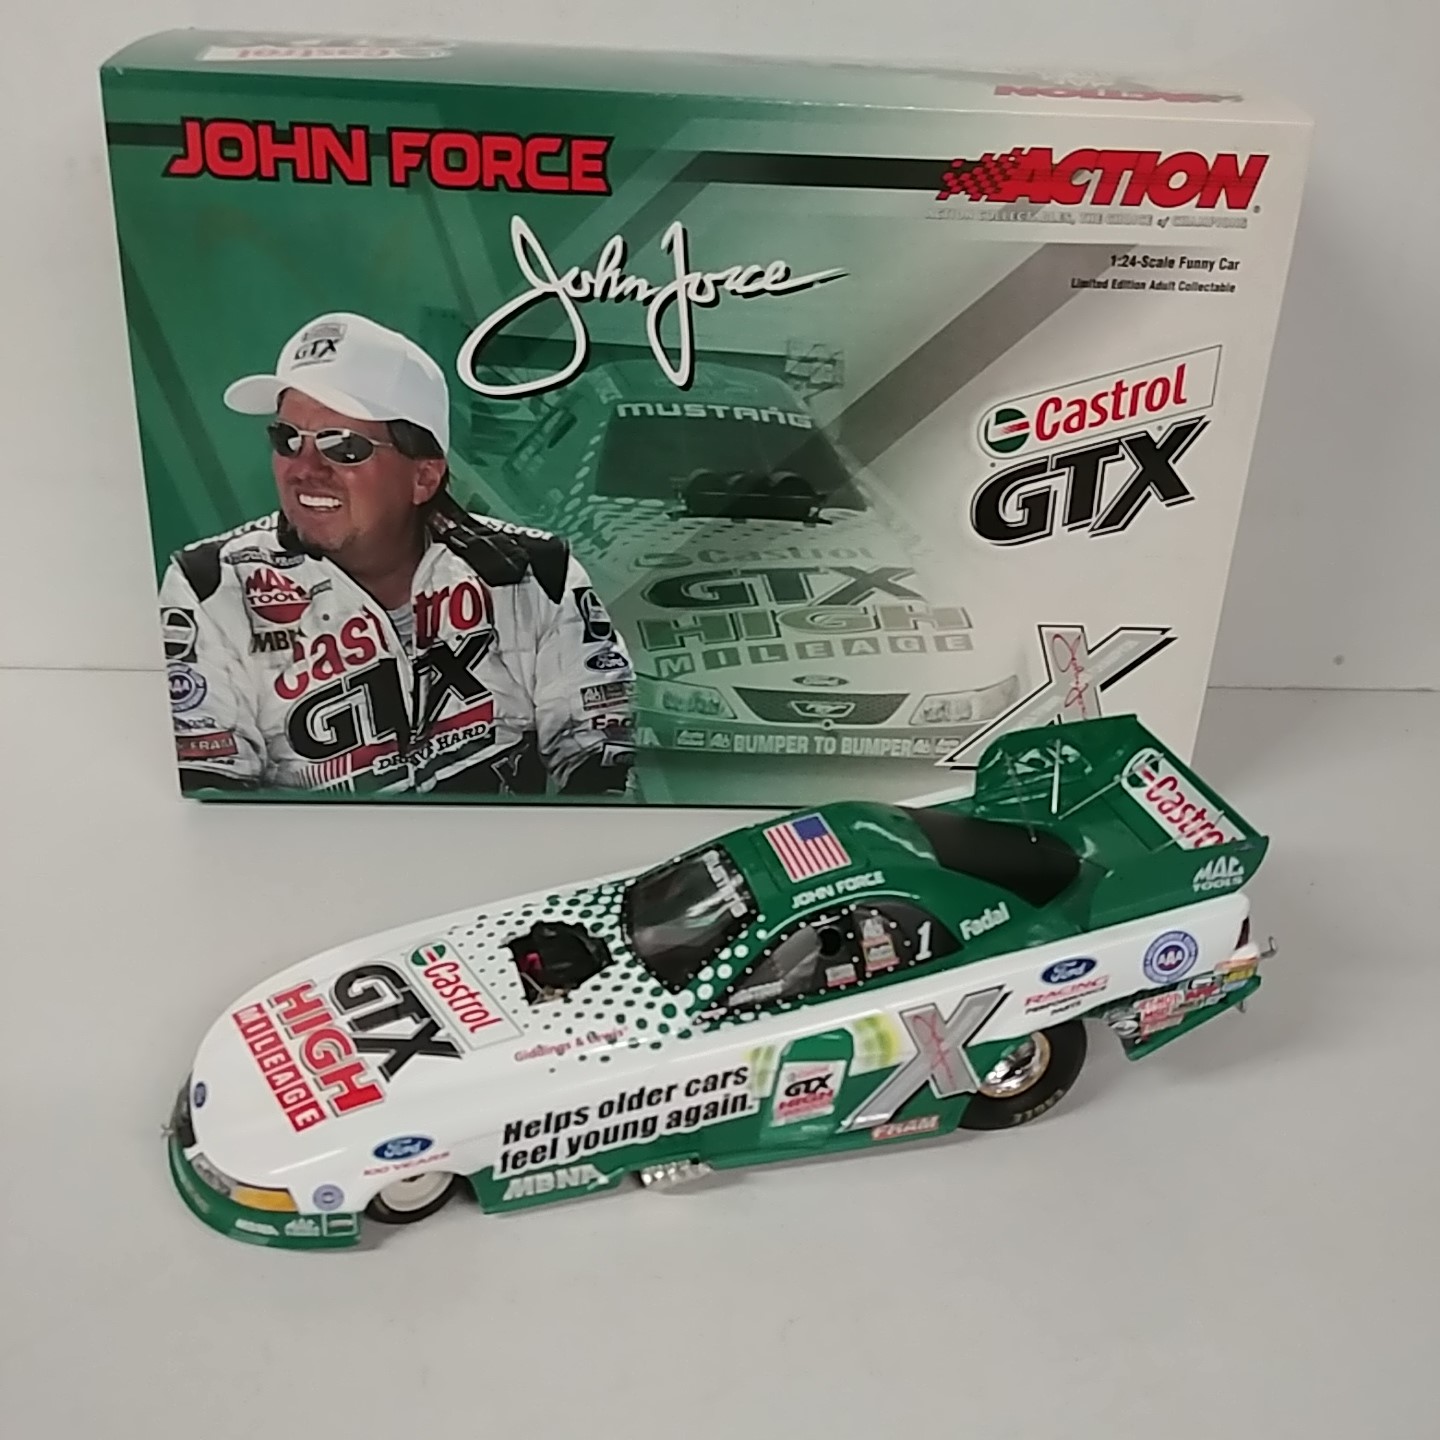 1998 Action 1/24 John Force Mustang Funny Car 7X Champion New in Box 